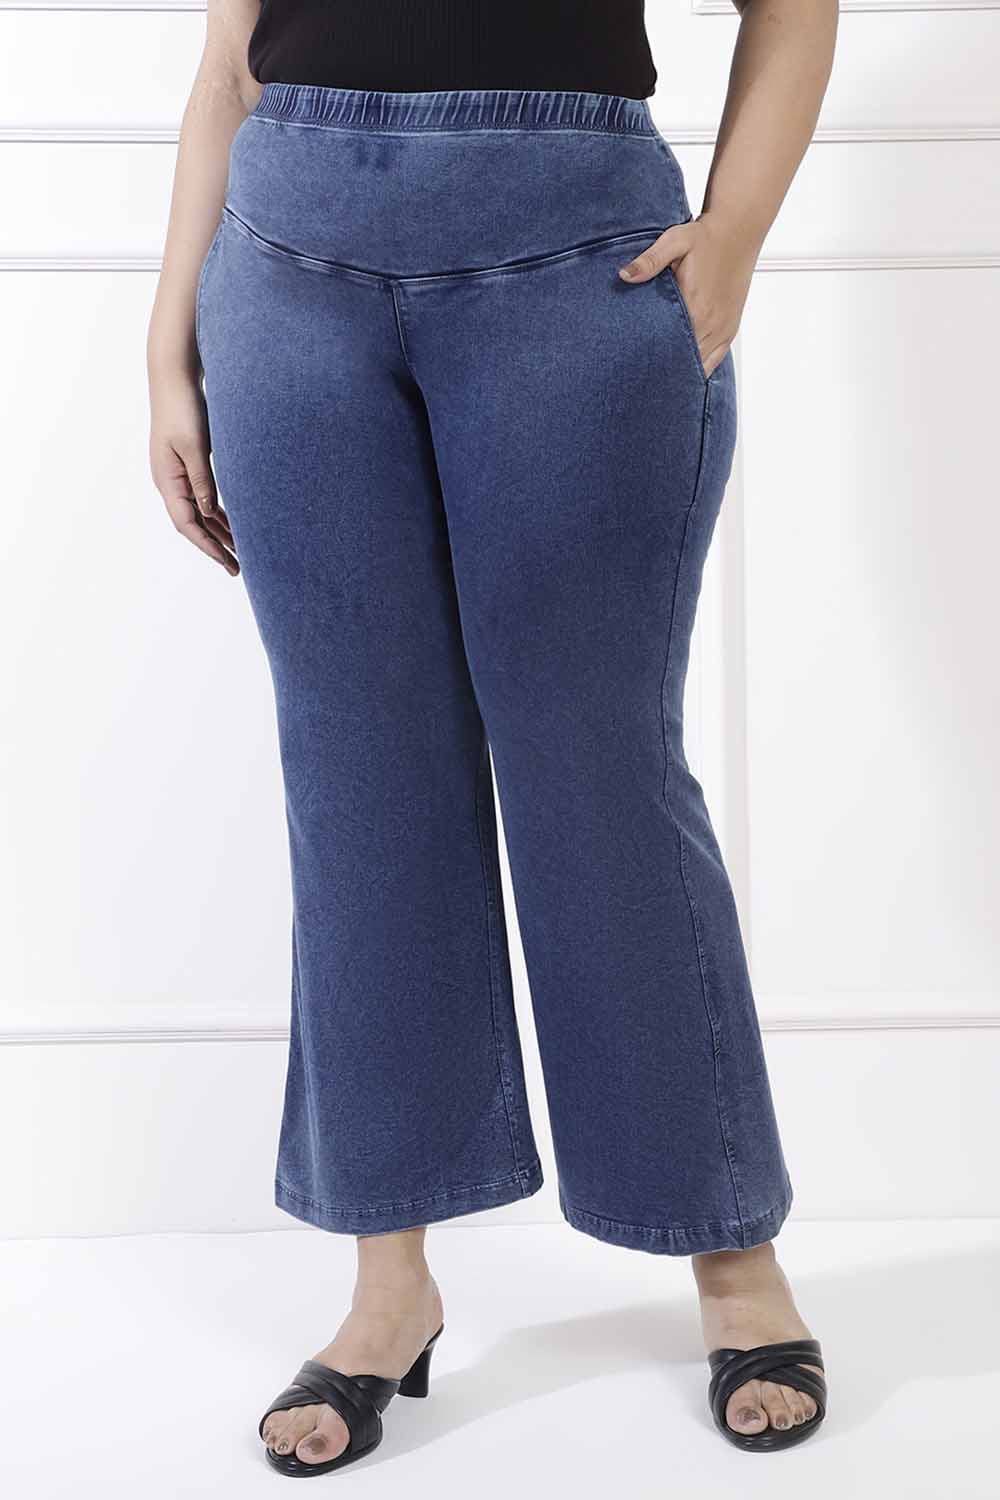 Plus Size Flare Jeans With Ripped Holes For Women Washed Blue Bell Bottom Plus  Size Flare Leggings In Sizes 3XL 5XL Fashionable Fall/Winter Clothes With  DHL Shipping 5635 From Sell_clothing, $22.44